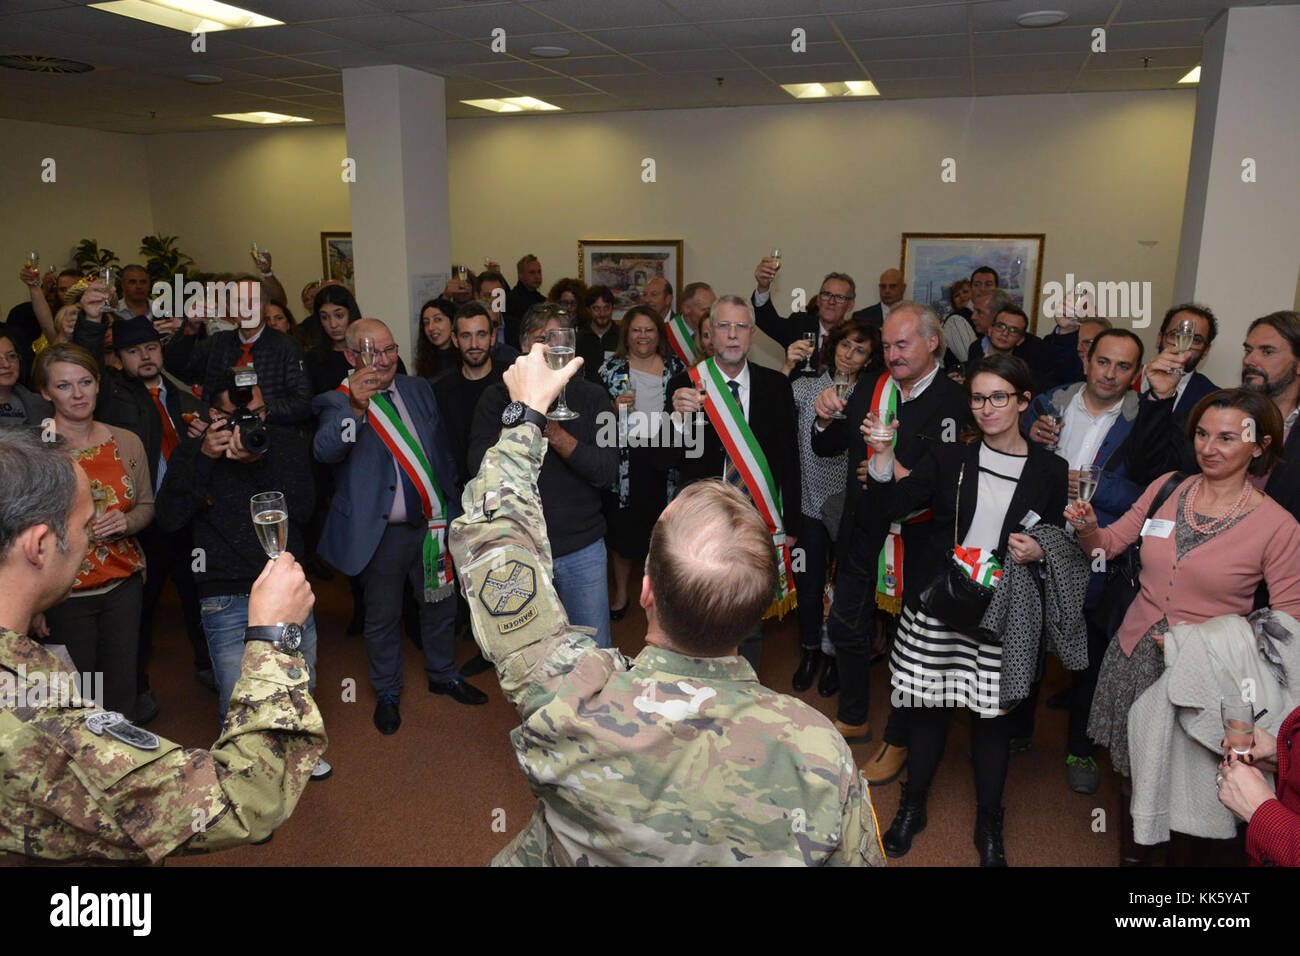 U.S. Col. Eric M. Berdy, U.S. Army Garrison Italy commander, toast with participants at the annual Meet the Mayors event at the Golden Lion Conference Center on Caserma Ederle, Vicenza, Italy, Nov. 8, 2017.   The event brings the American and Italian communities together and gives Italian locals an opportunity to share their cultural heritage with the military community. (U.S. Army Photo by Paolo Bovo) Stock Photo